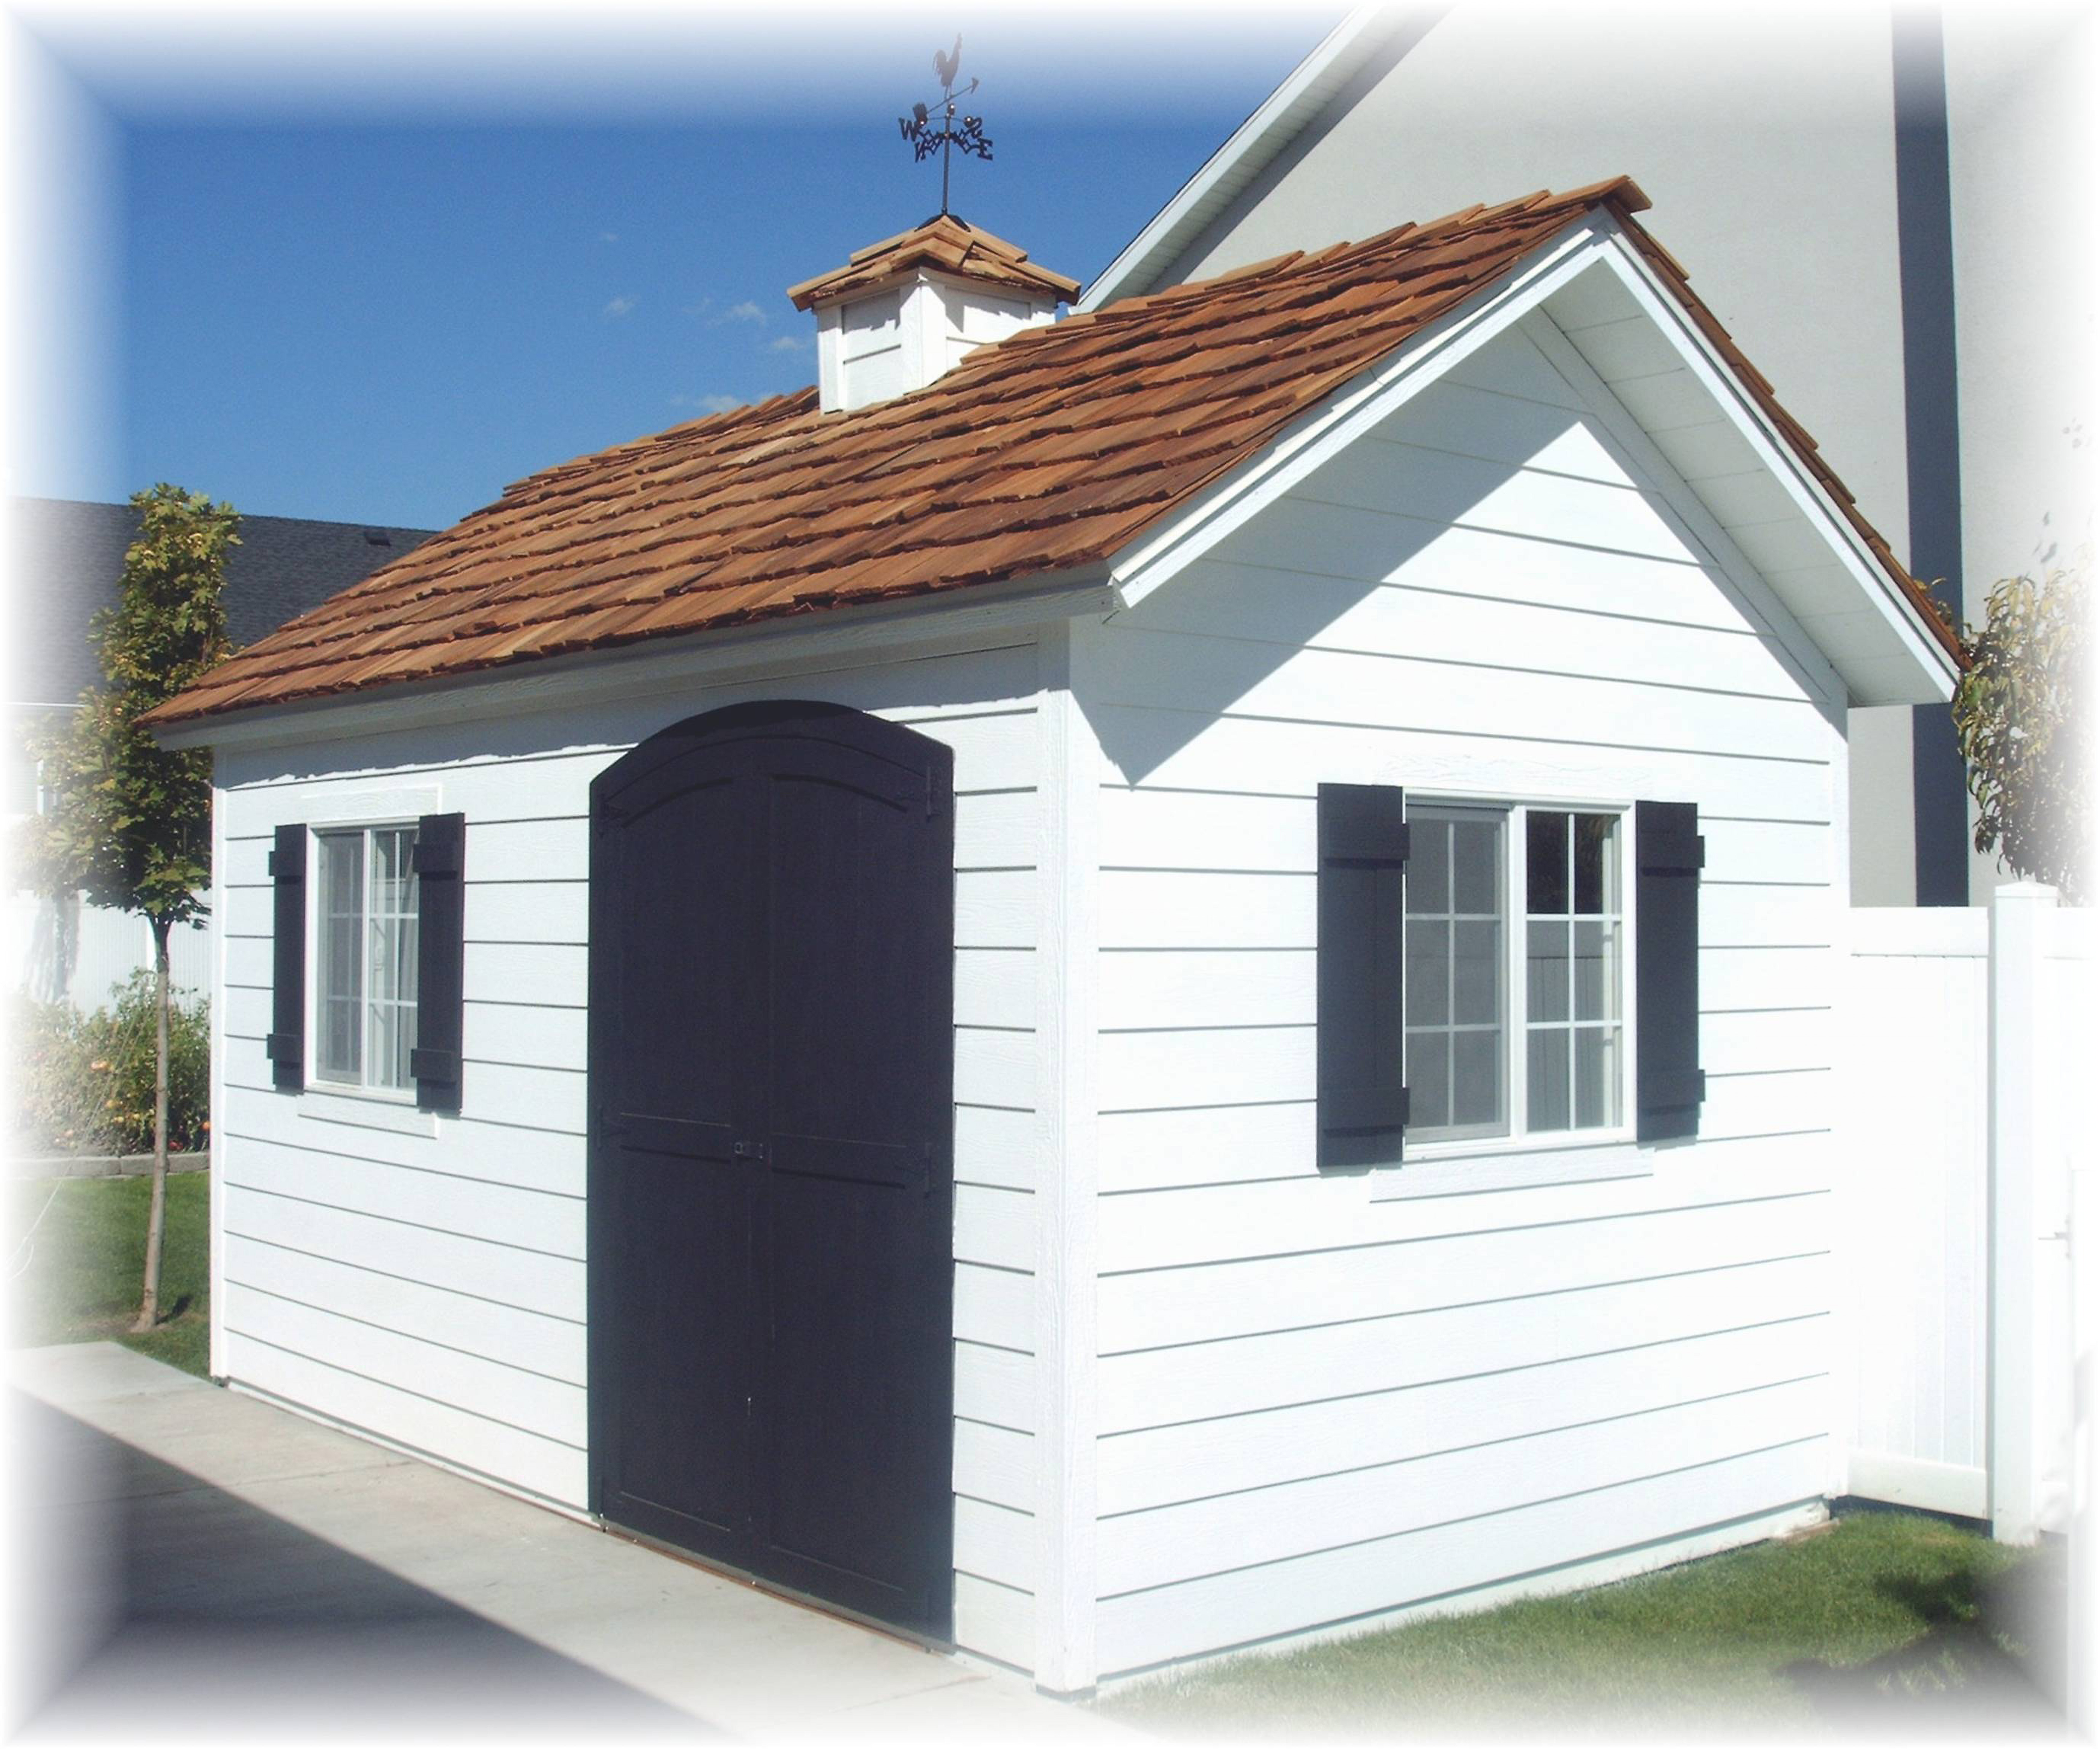 Custom 8 foot by 16 foot Tall Apex with Lap siding, cedar shake shingles and a cupola with a weathervane.